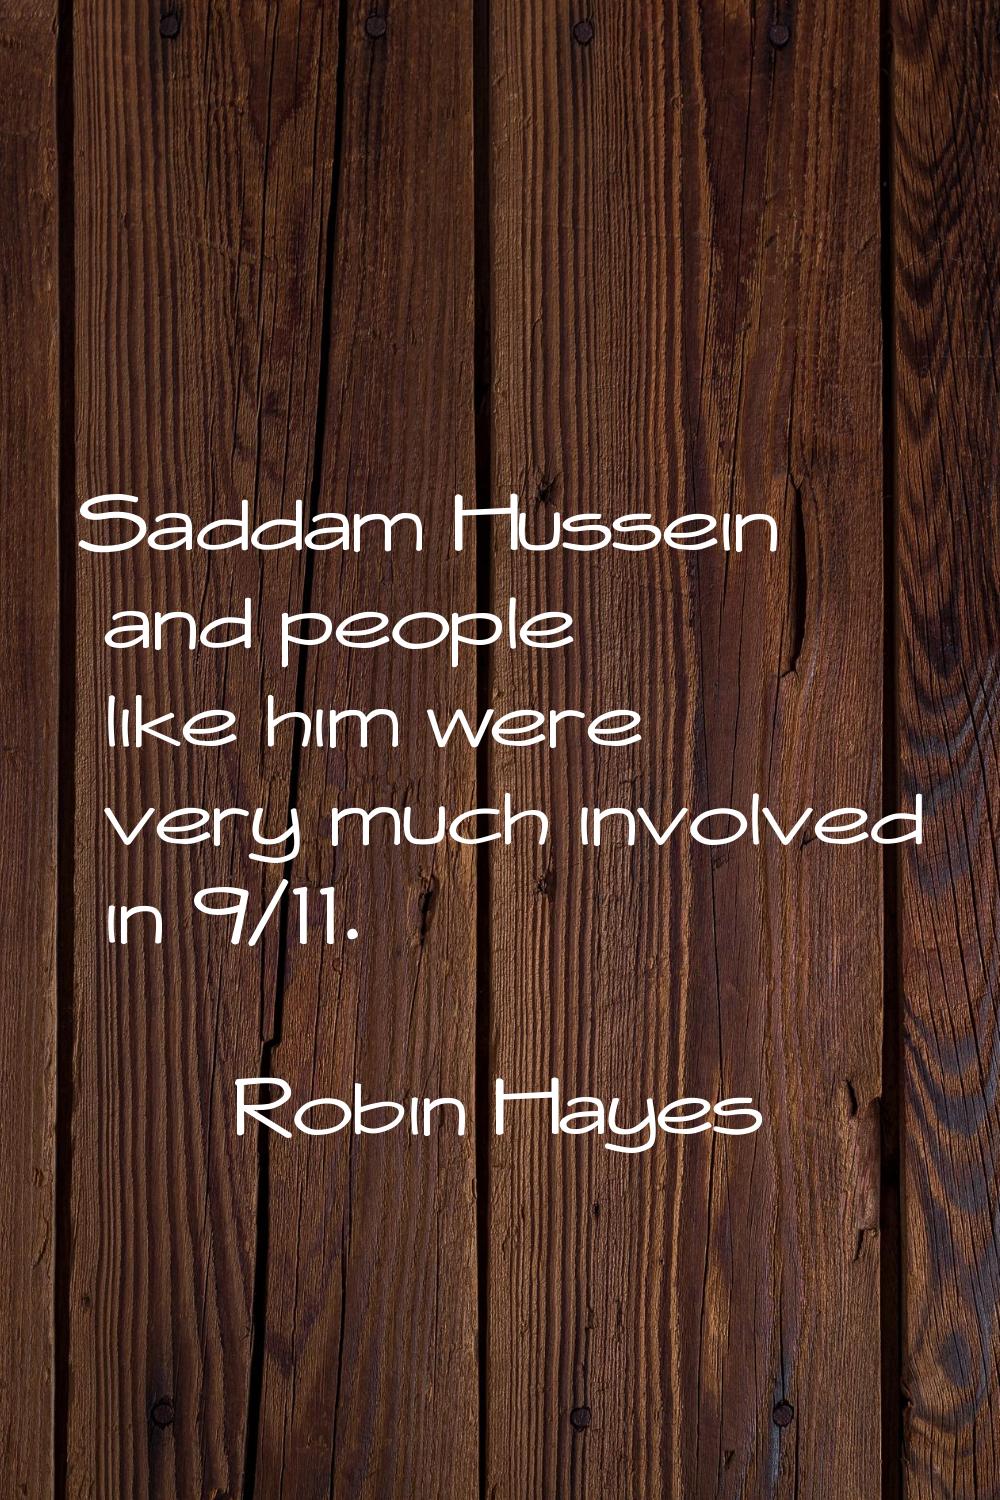 Saddam Hussein and people like him were very much involved in 9/11.